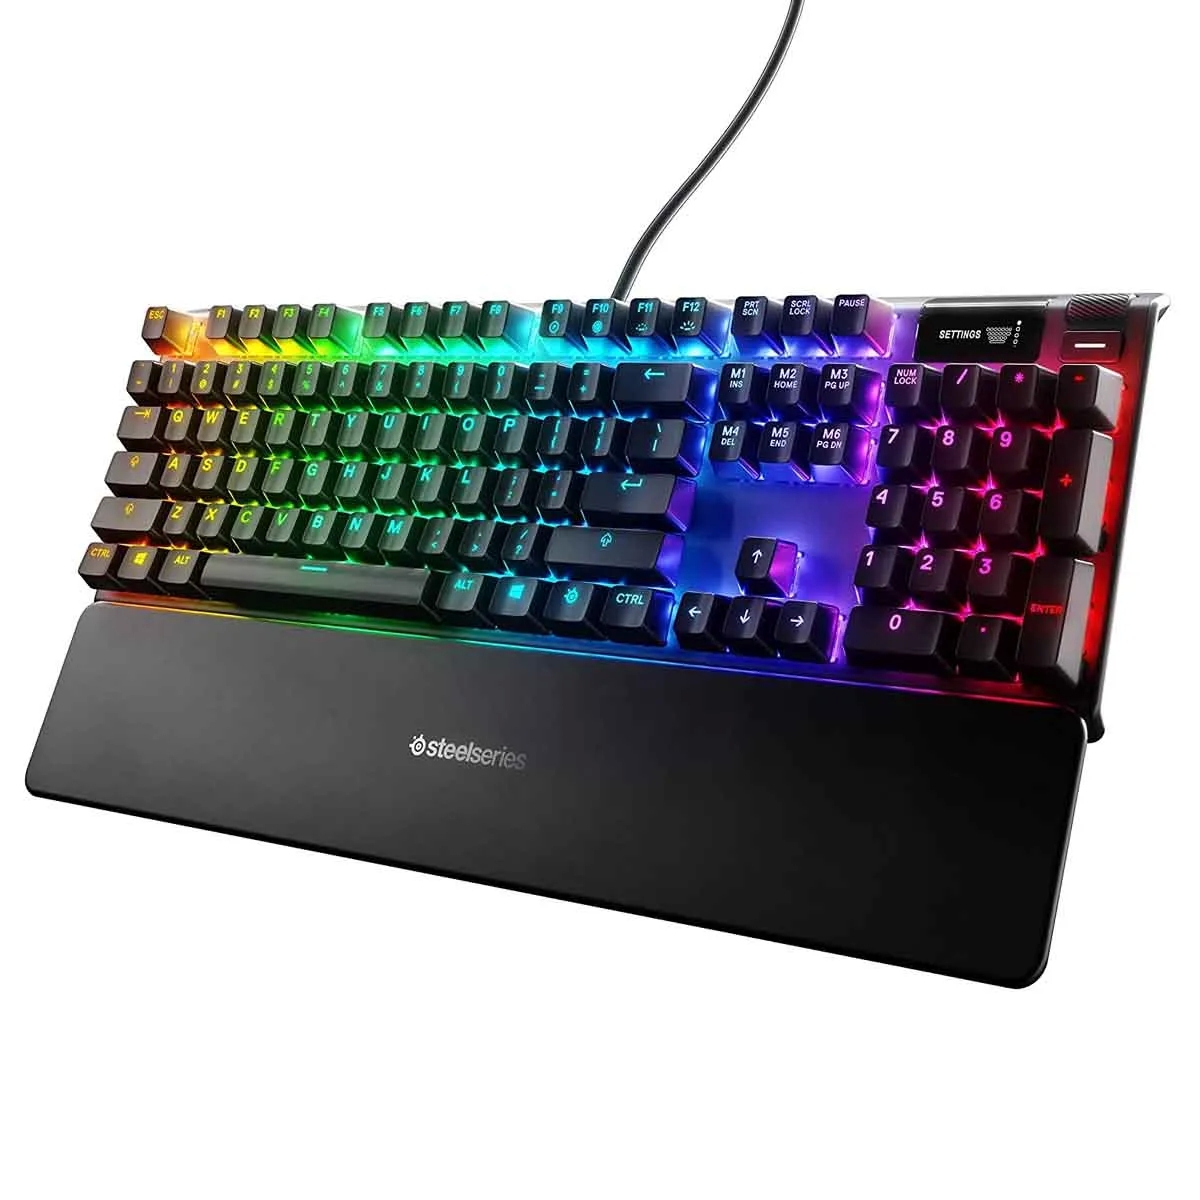 Why Are Gaming Keyboards Expensive?